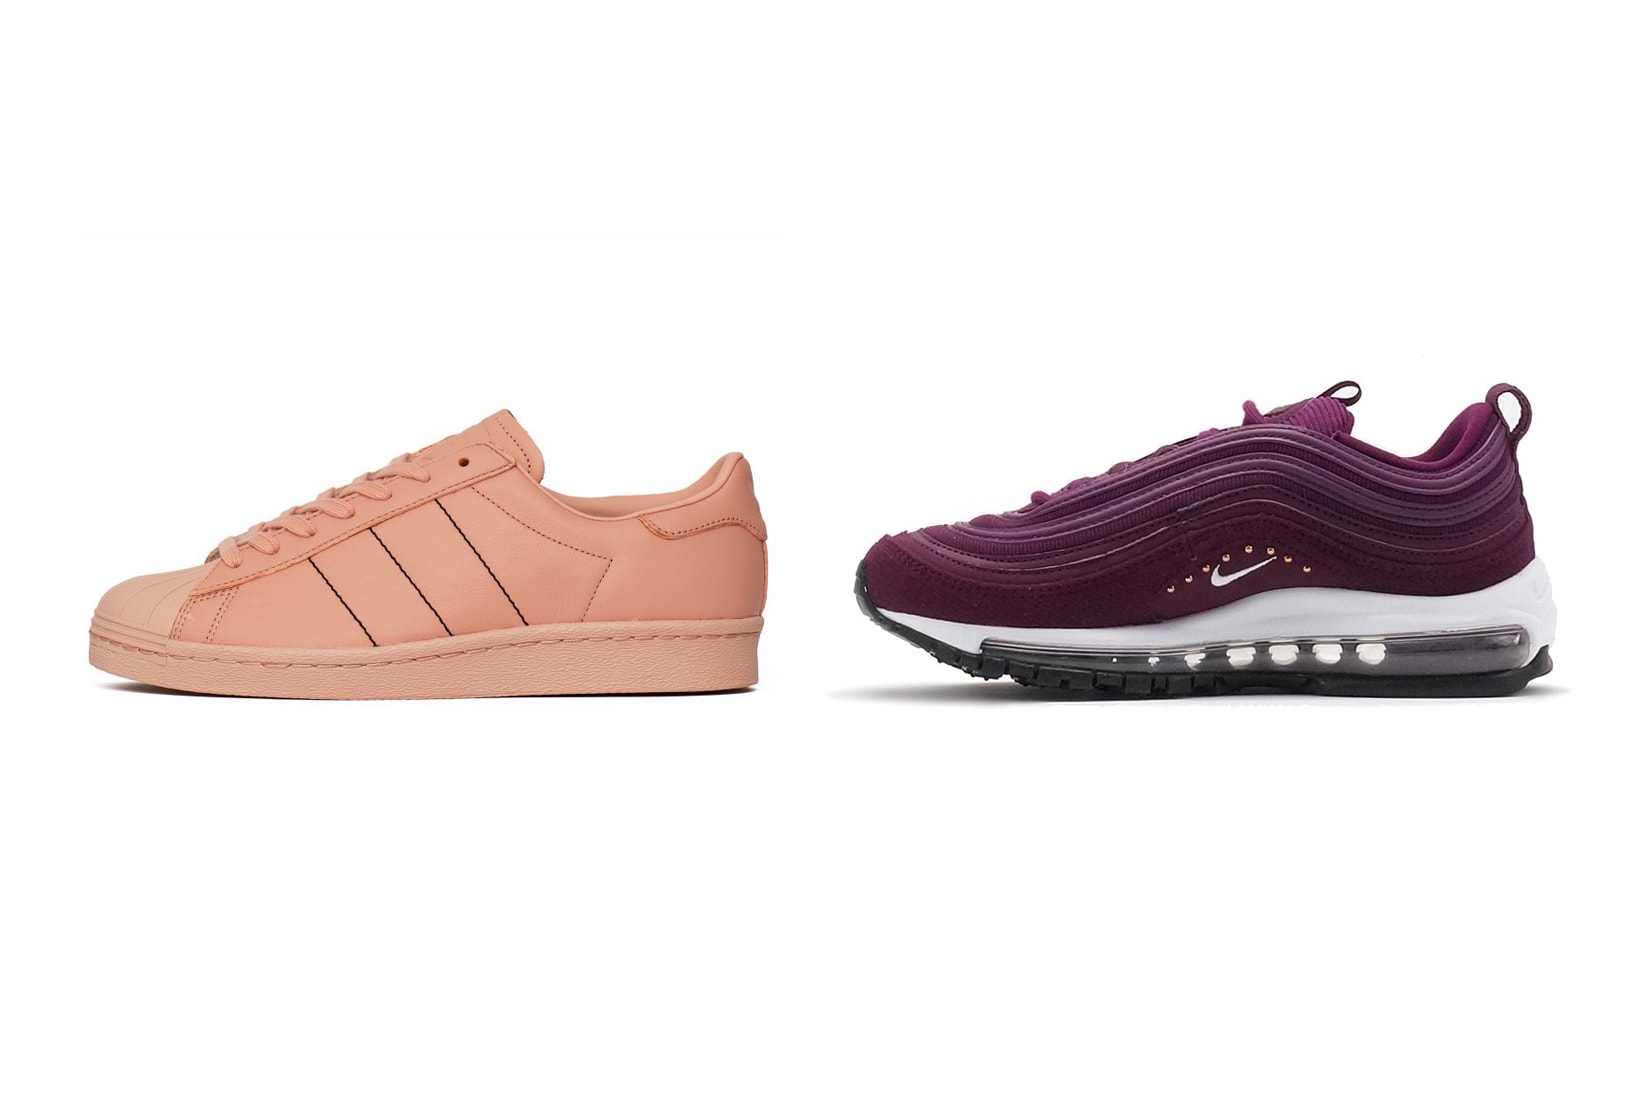 The Sneaker Edit adidas Originals Superstar 80s Trace Pink Nike Air Max 97 Special Edition Bordeaux